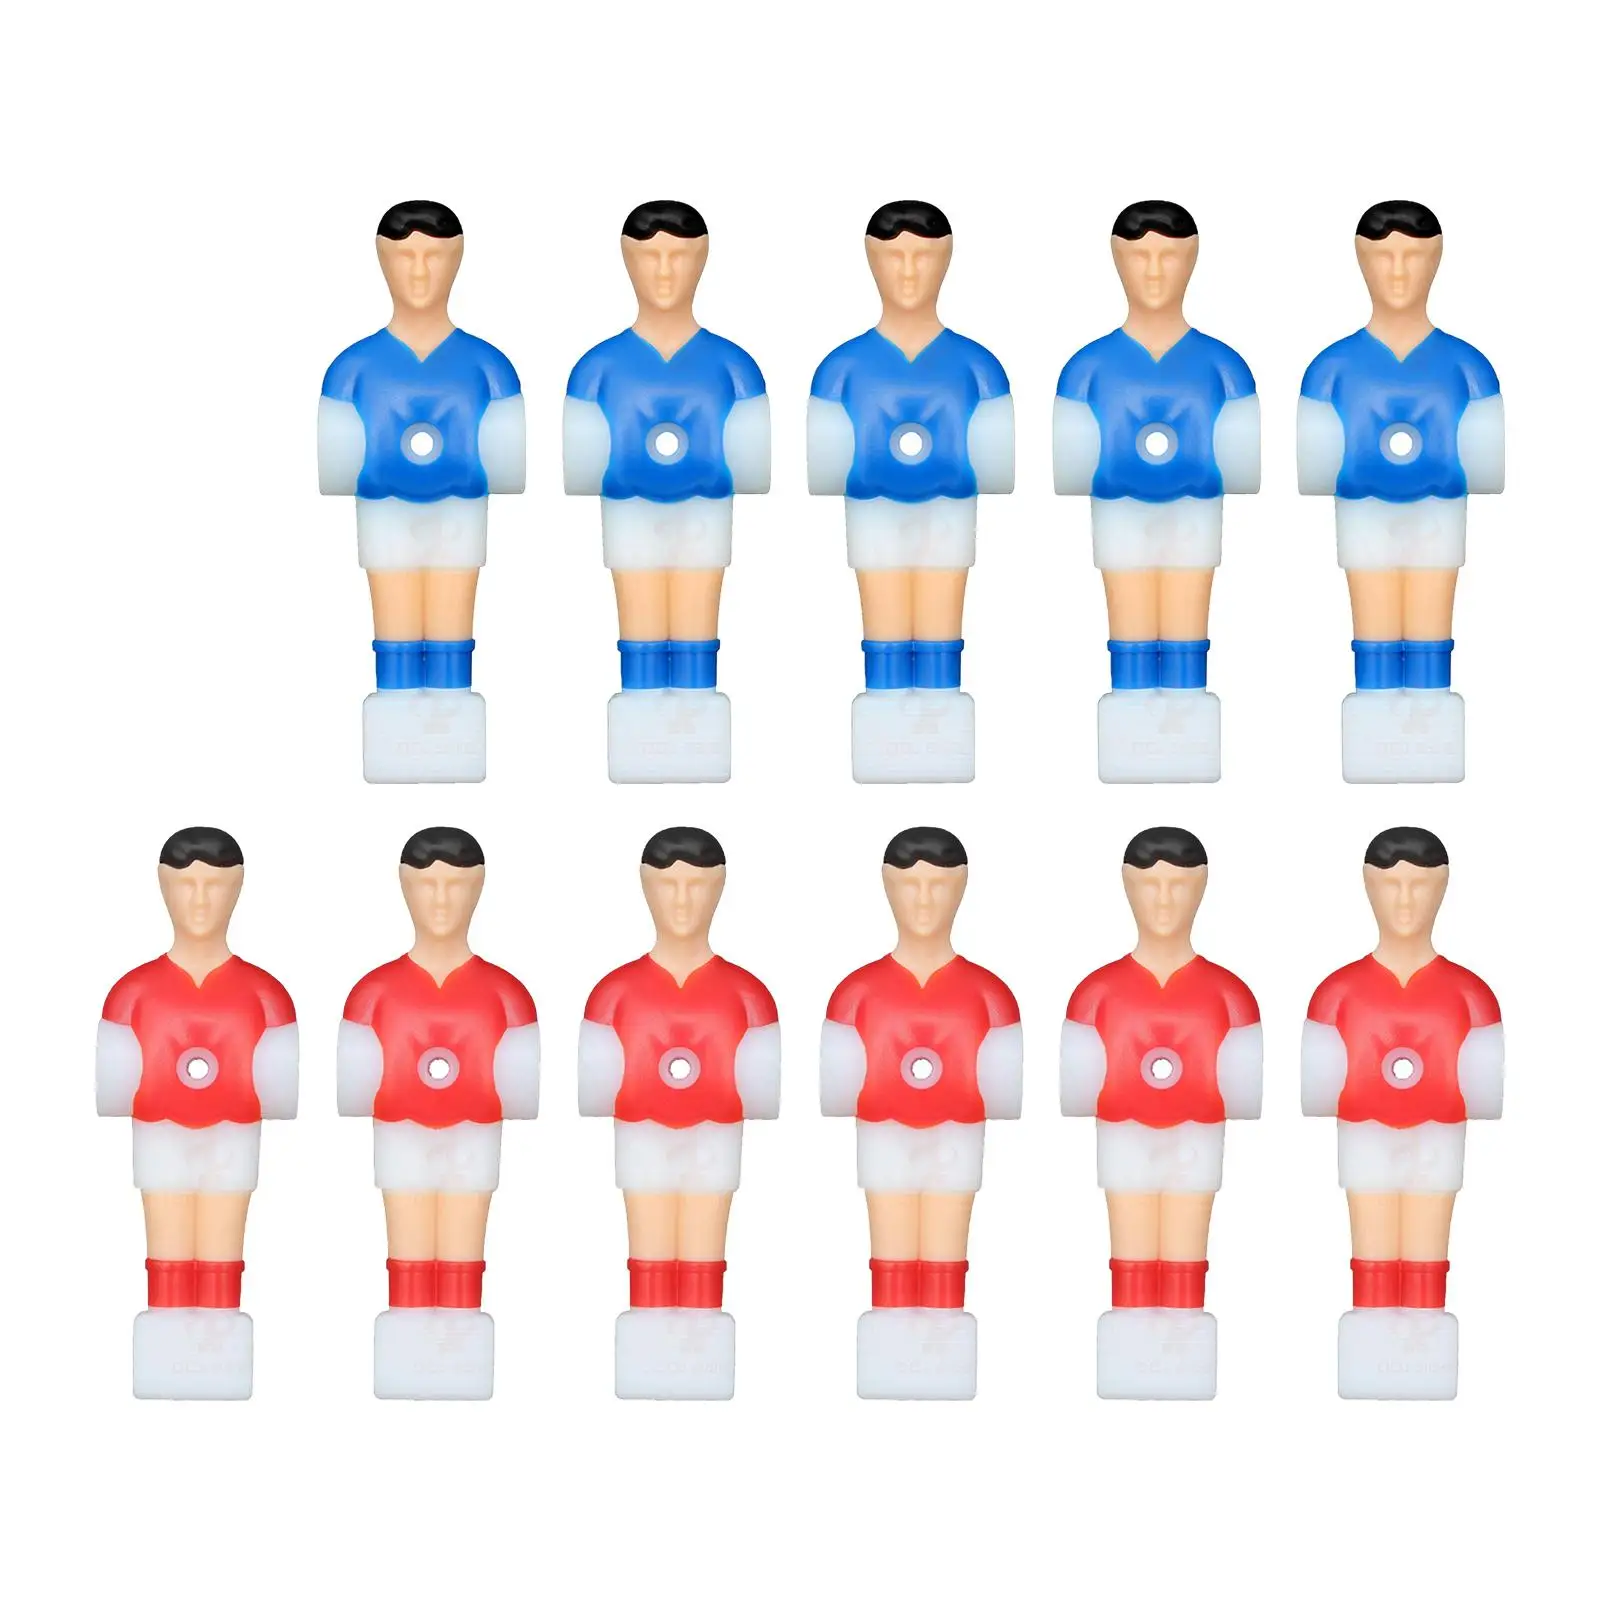 11x Foosball Men Replacement Blue and Red Mini Football Players Foosball Soccer Table Football Men for Table Games Home